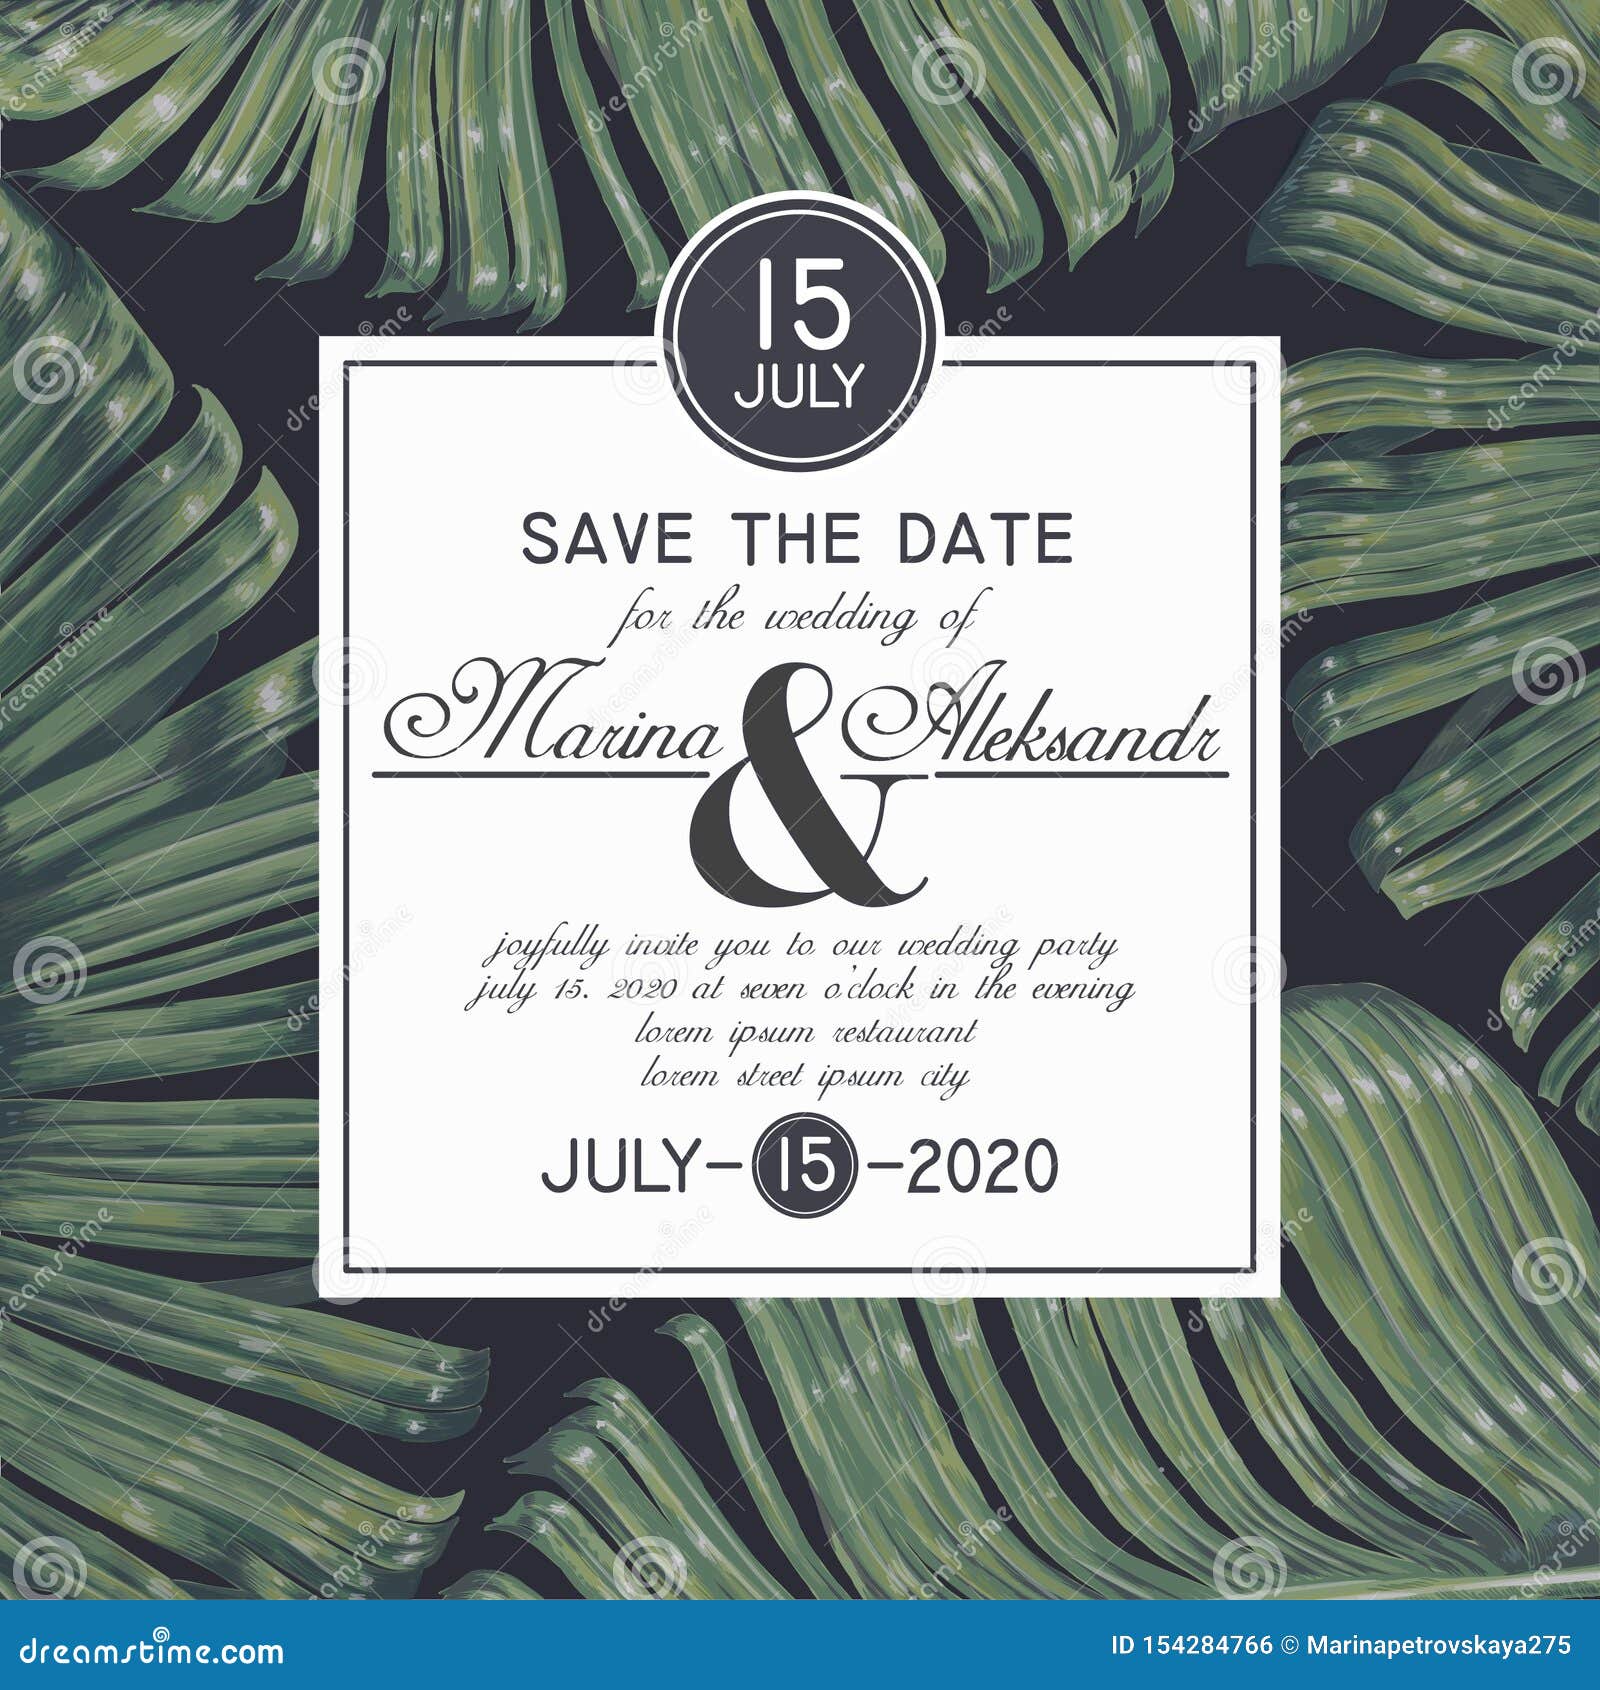 Vintage Save the Date Card with Botanical Design in Realistic Regarding Save The Date Flyer Template